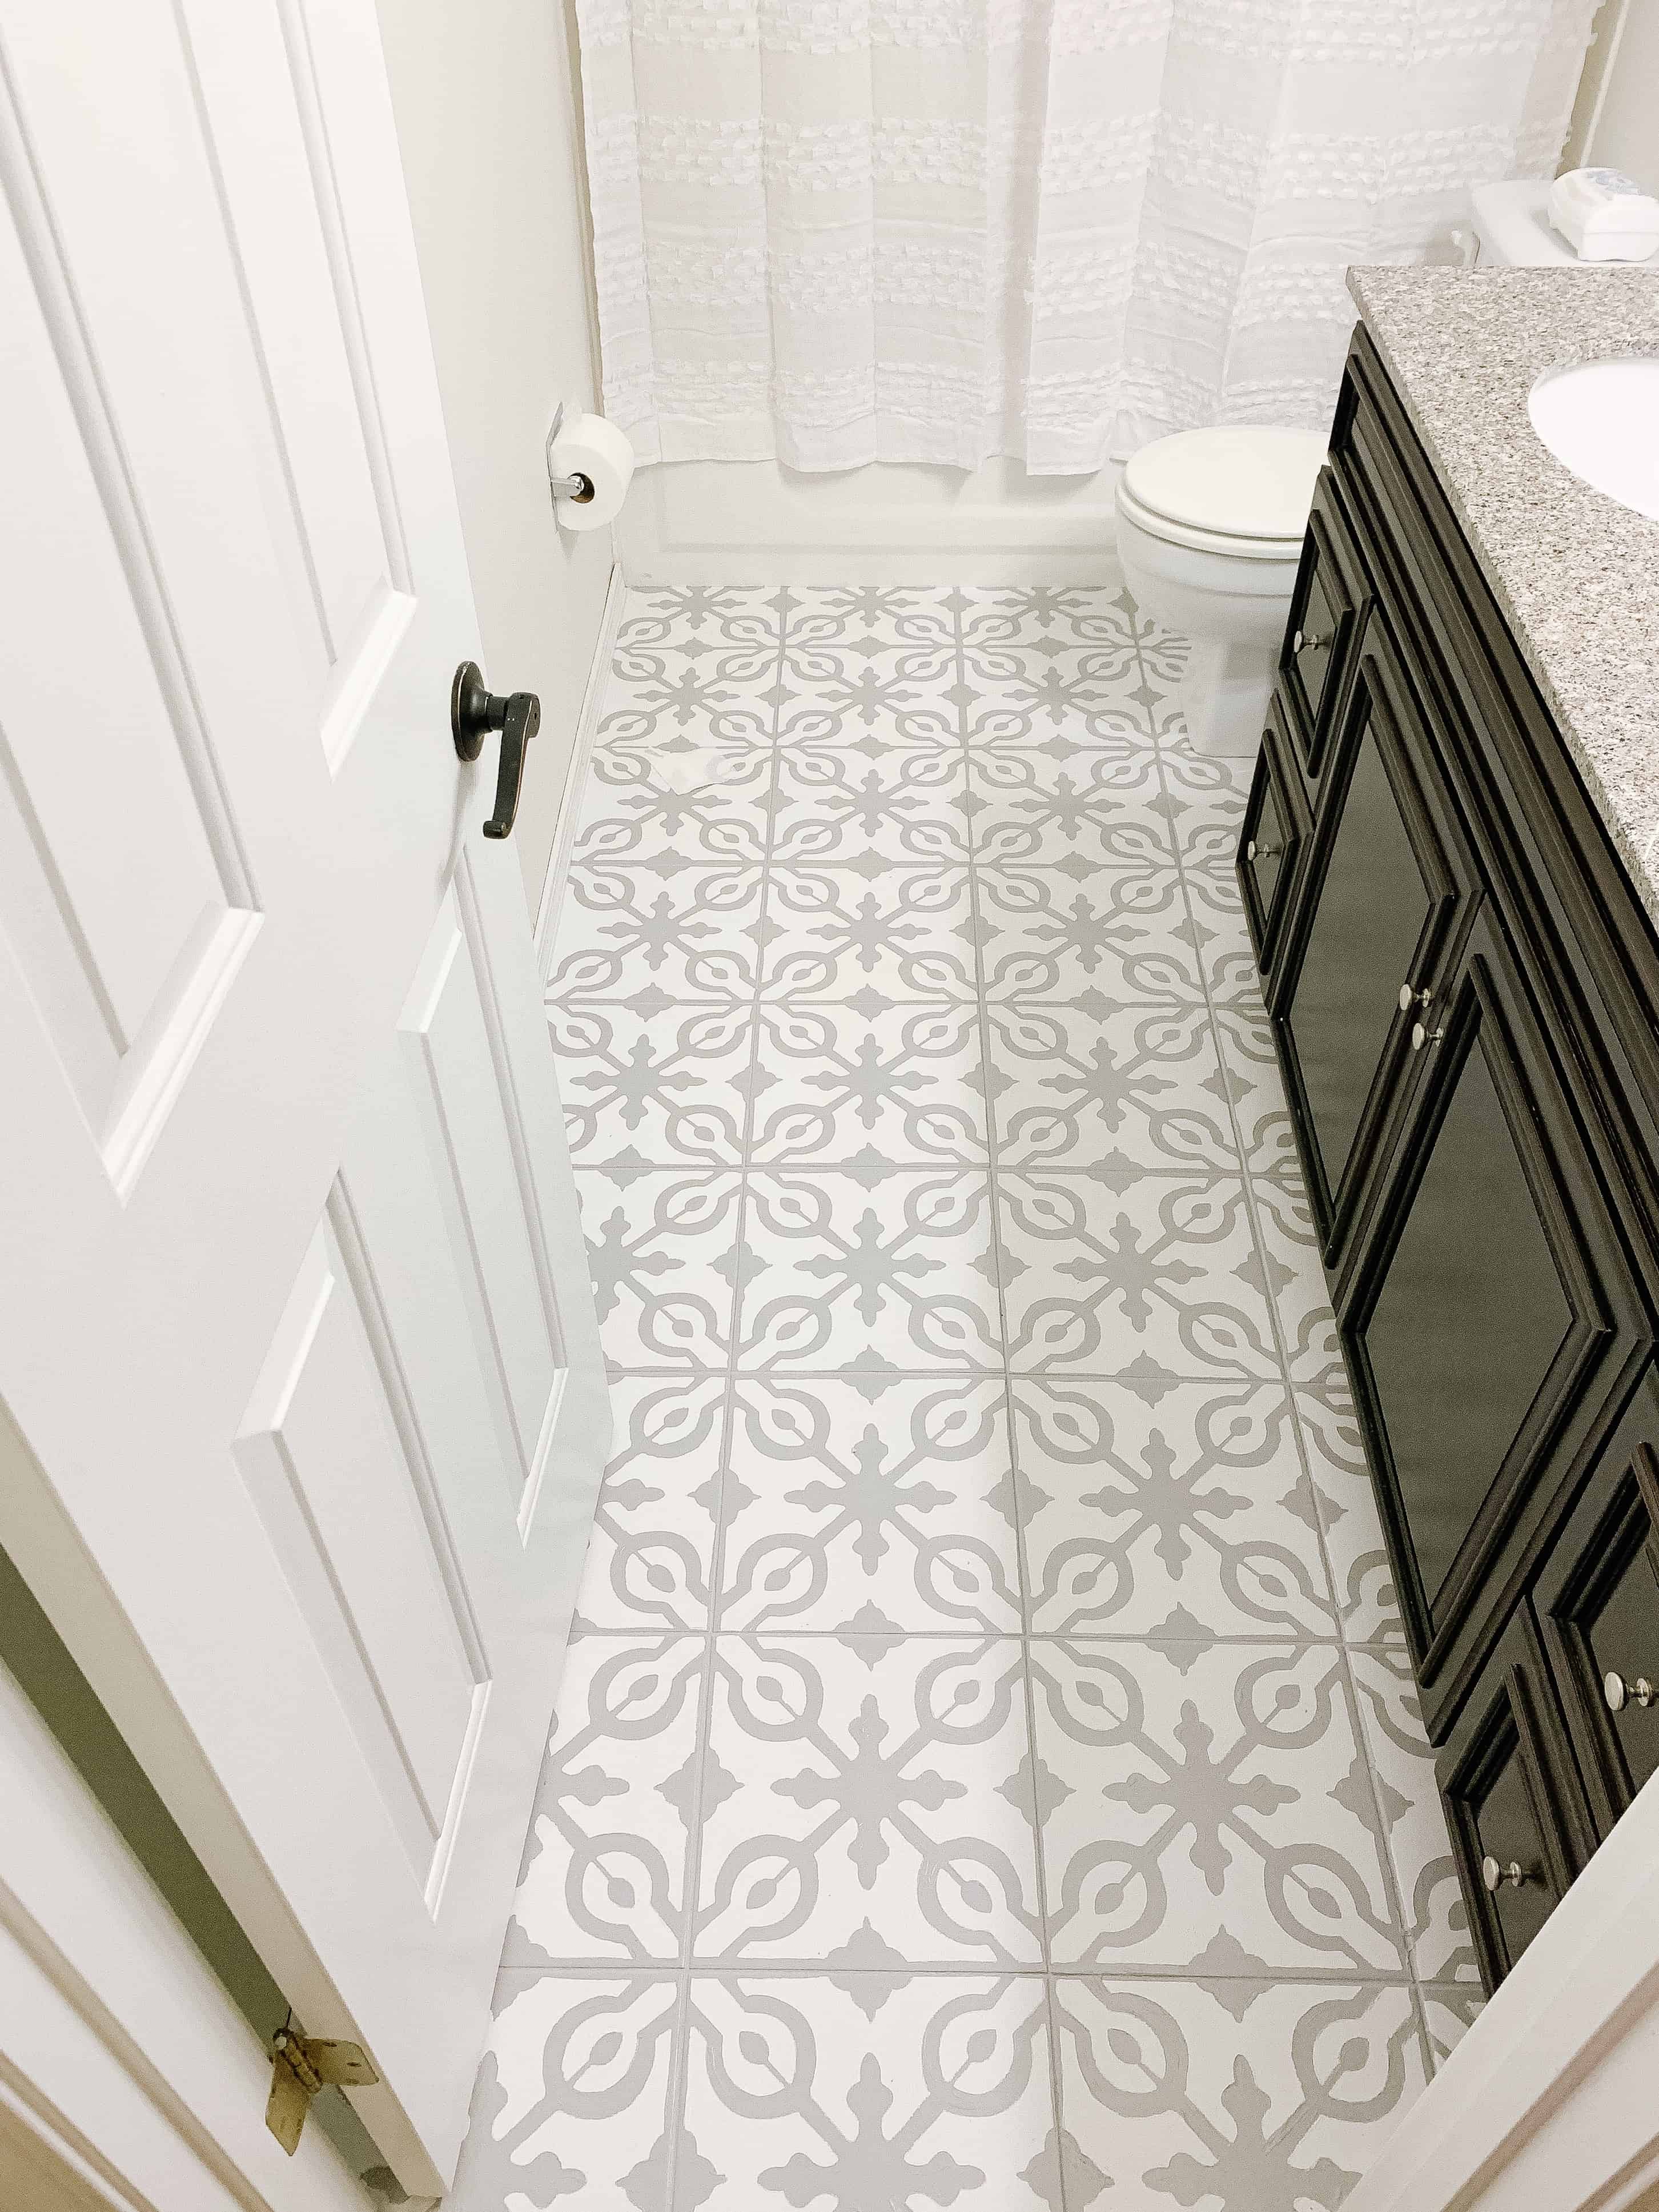 How To Paint Tile Floors, Painting Tile In Bathroom